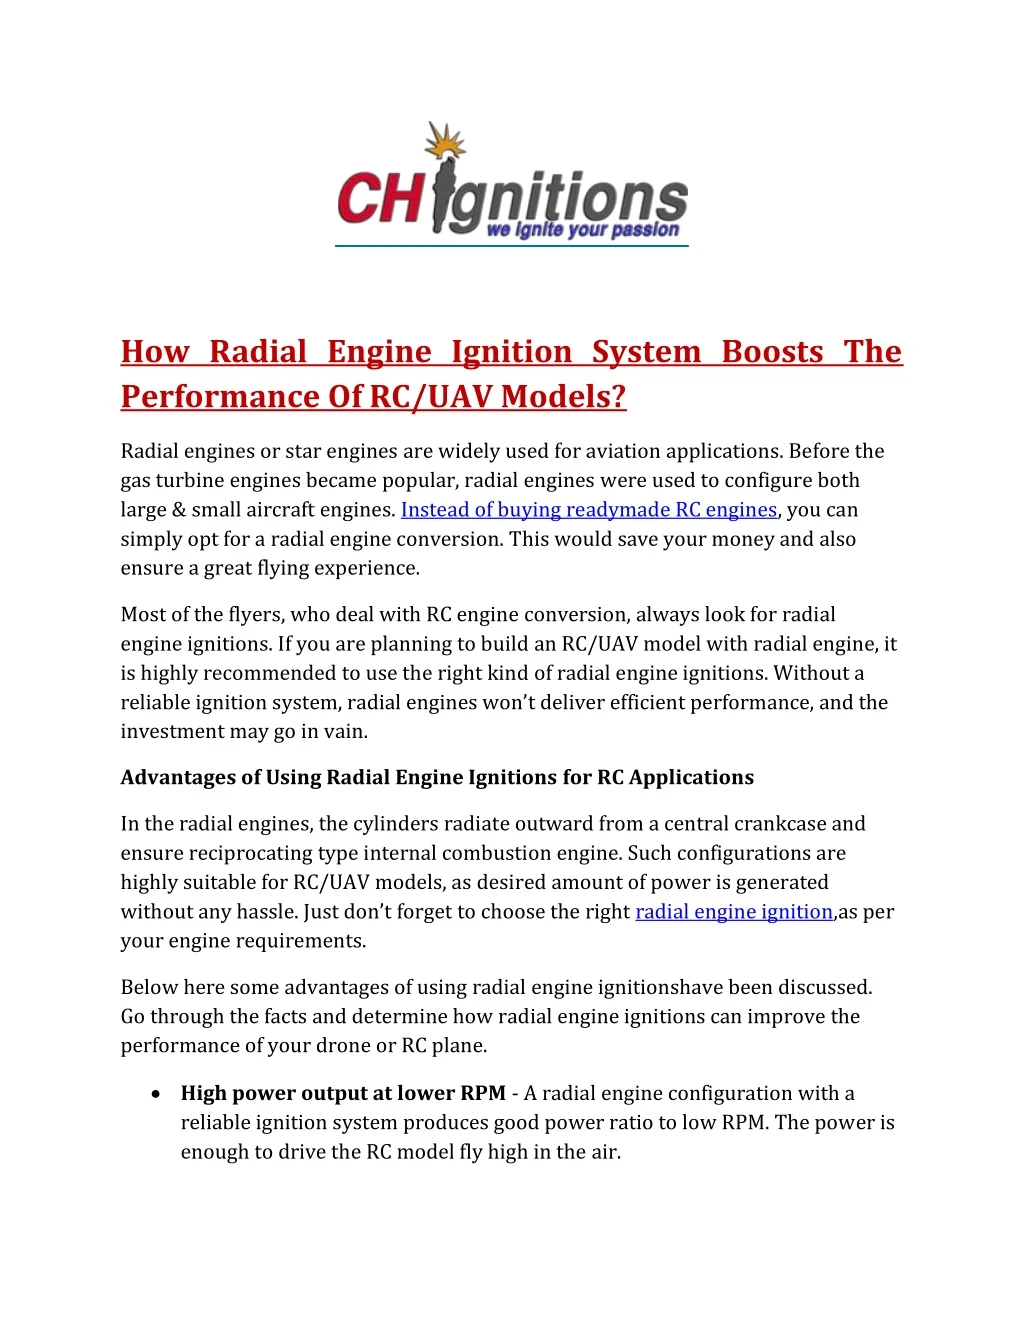 how radial engine ignition system boosts